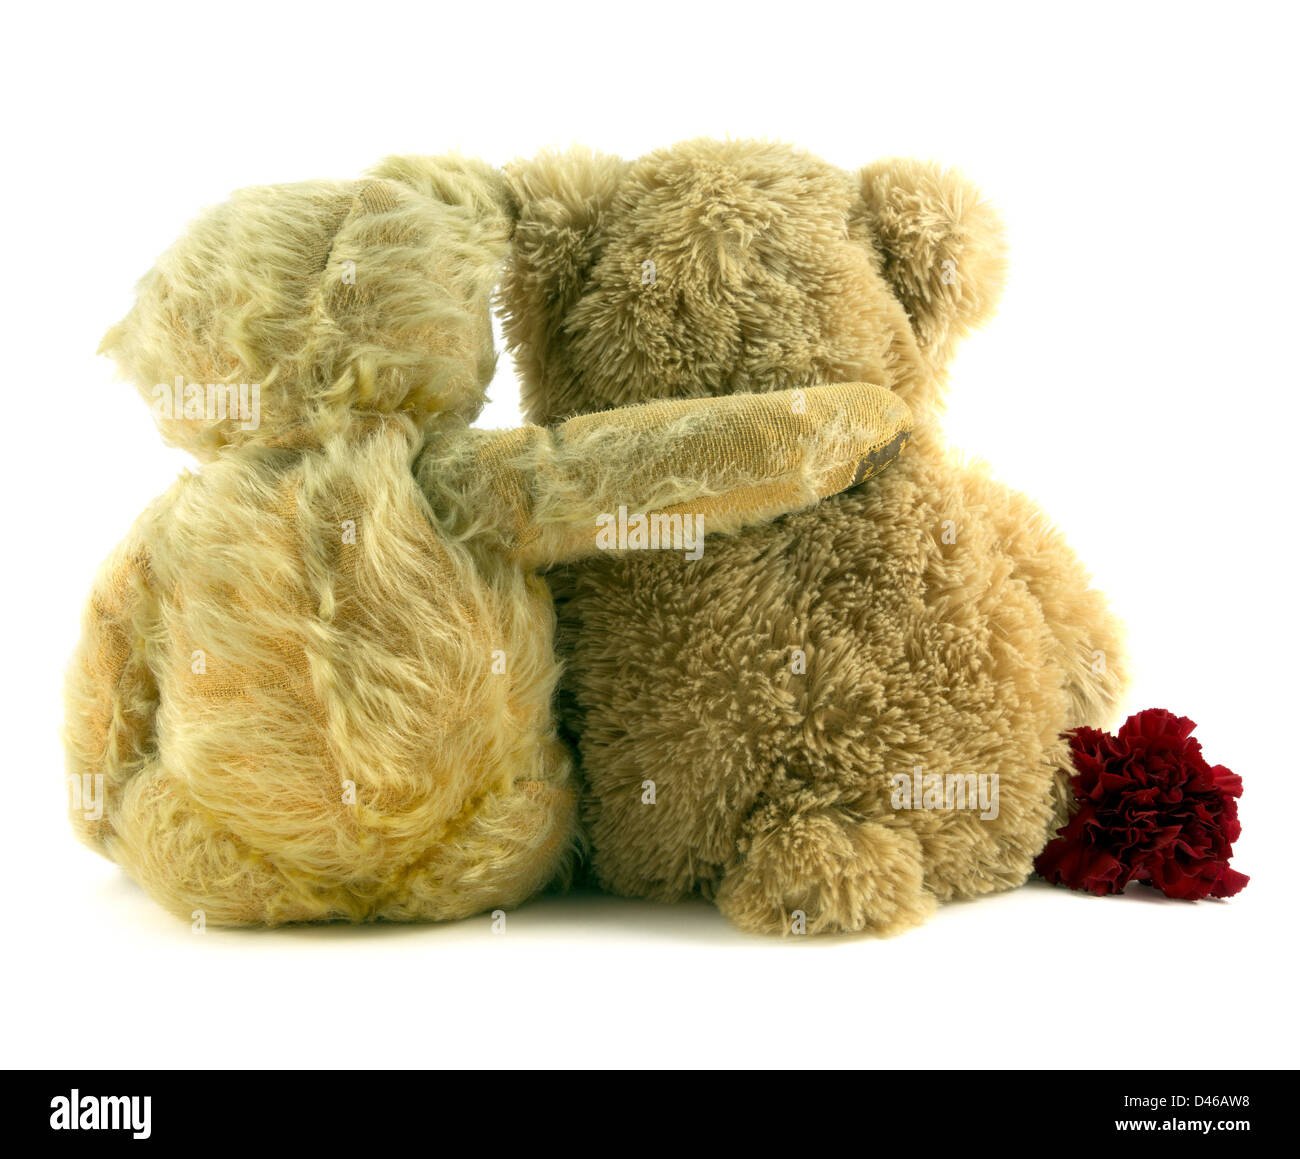 Old teddy sat with arm around younger teddy. Stock Photo